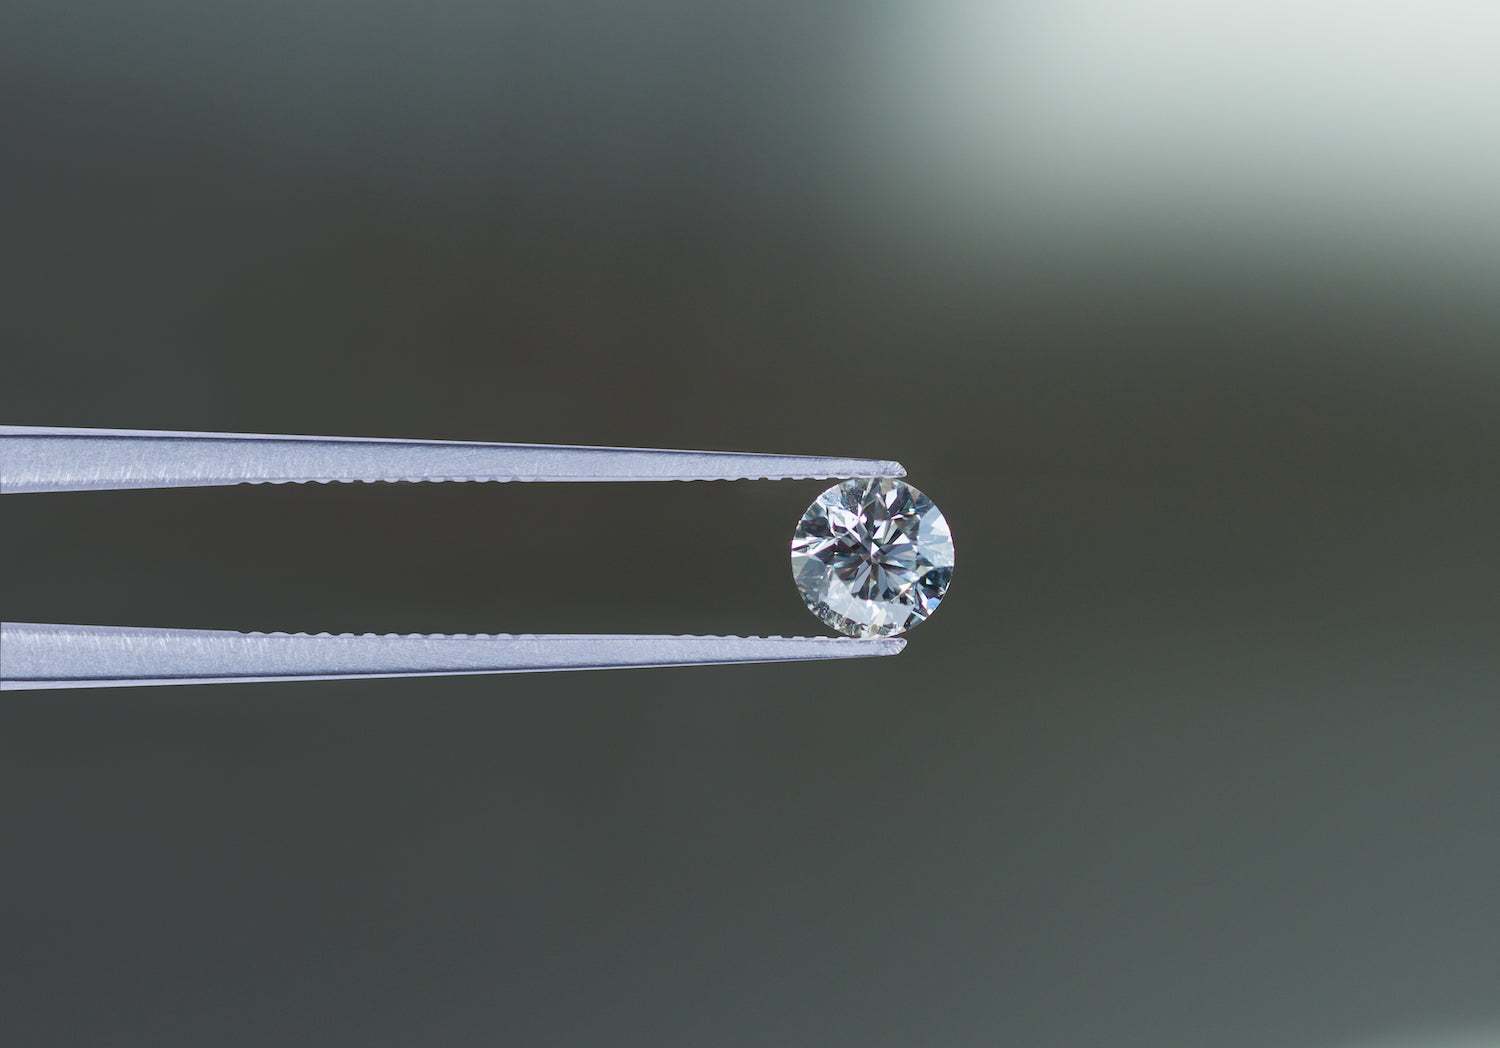 How Are Lab Grown Diamonds Made?